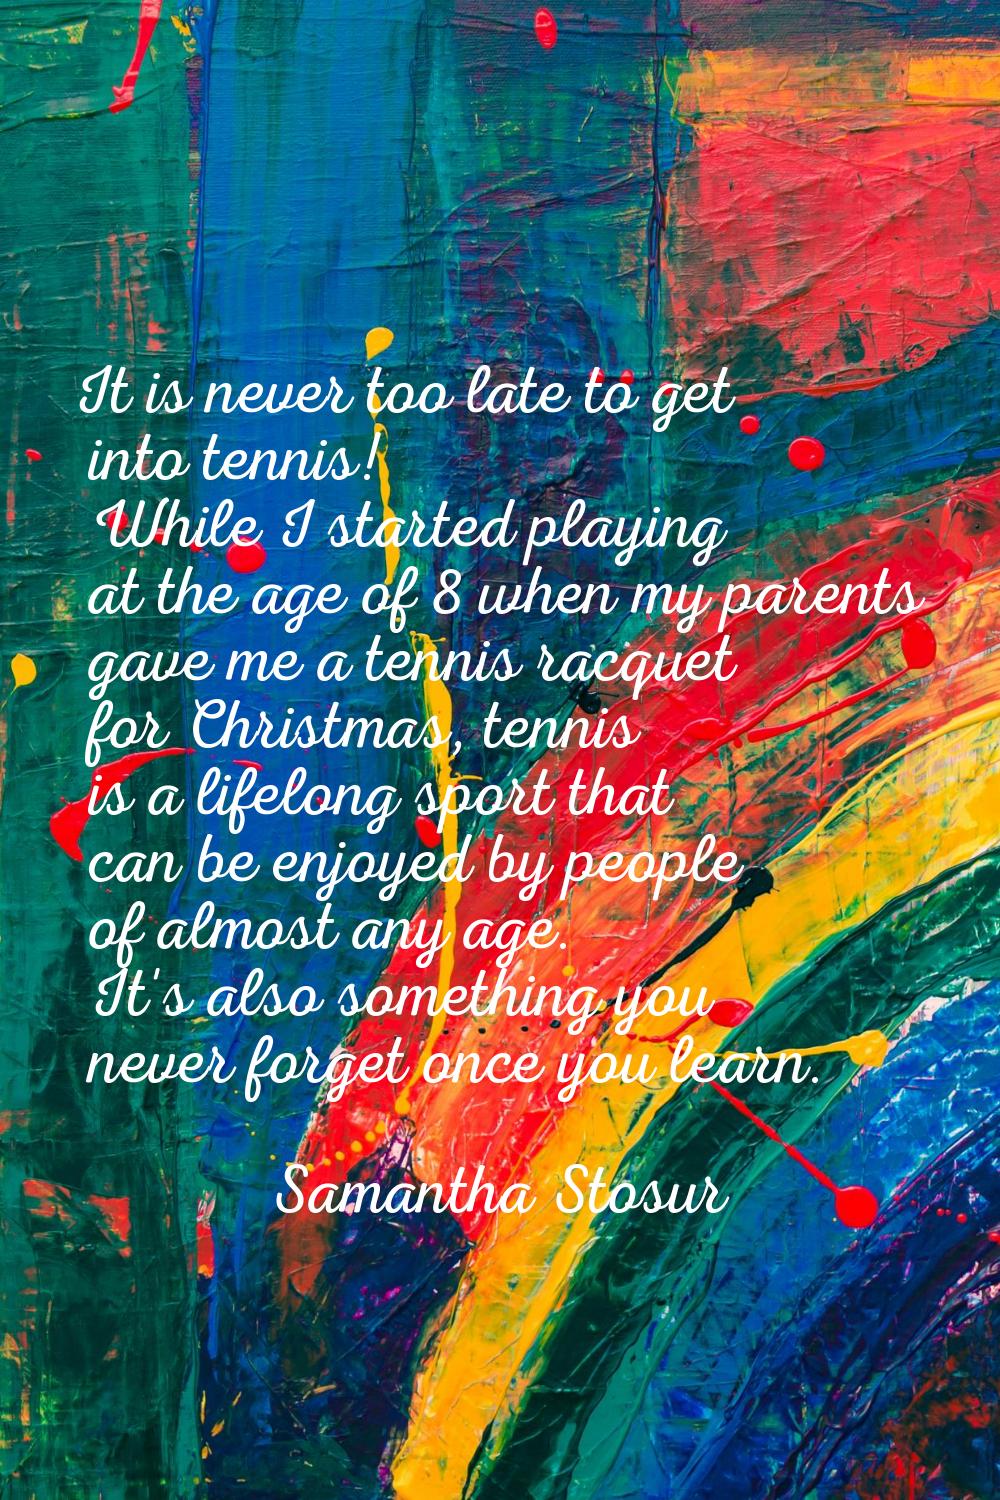 It is never too late to get into tennis! While I started playing at the age of 8 when my parents ga